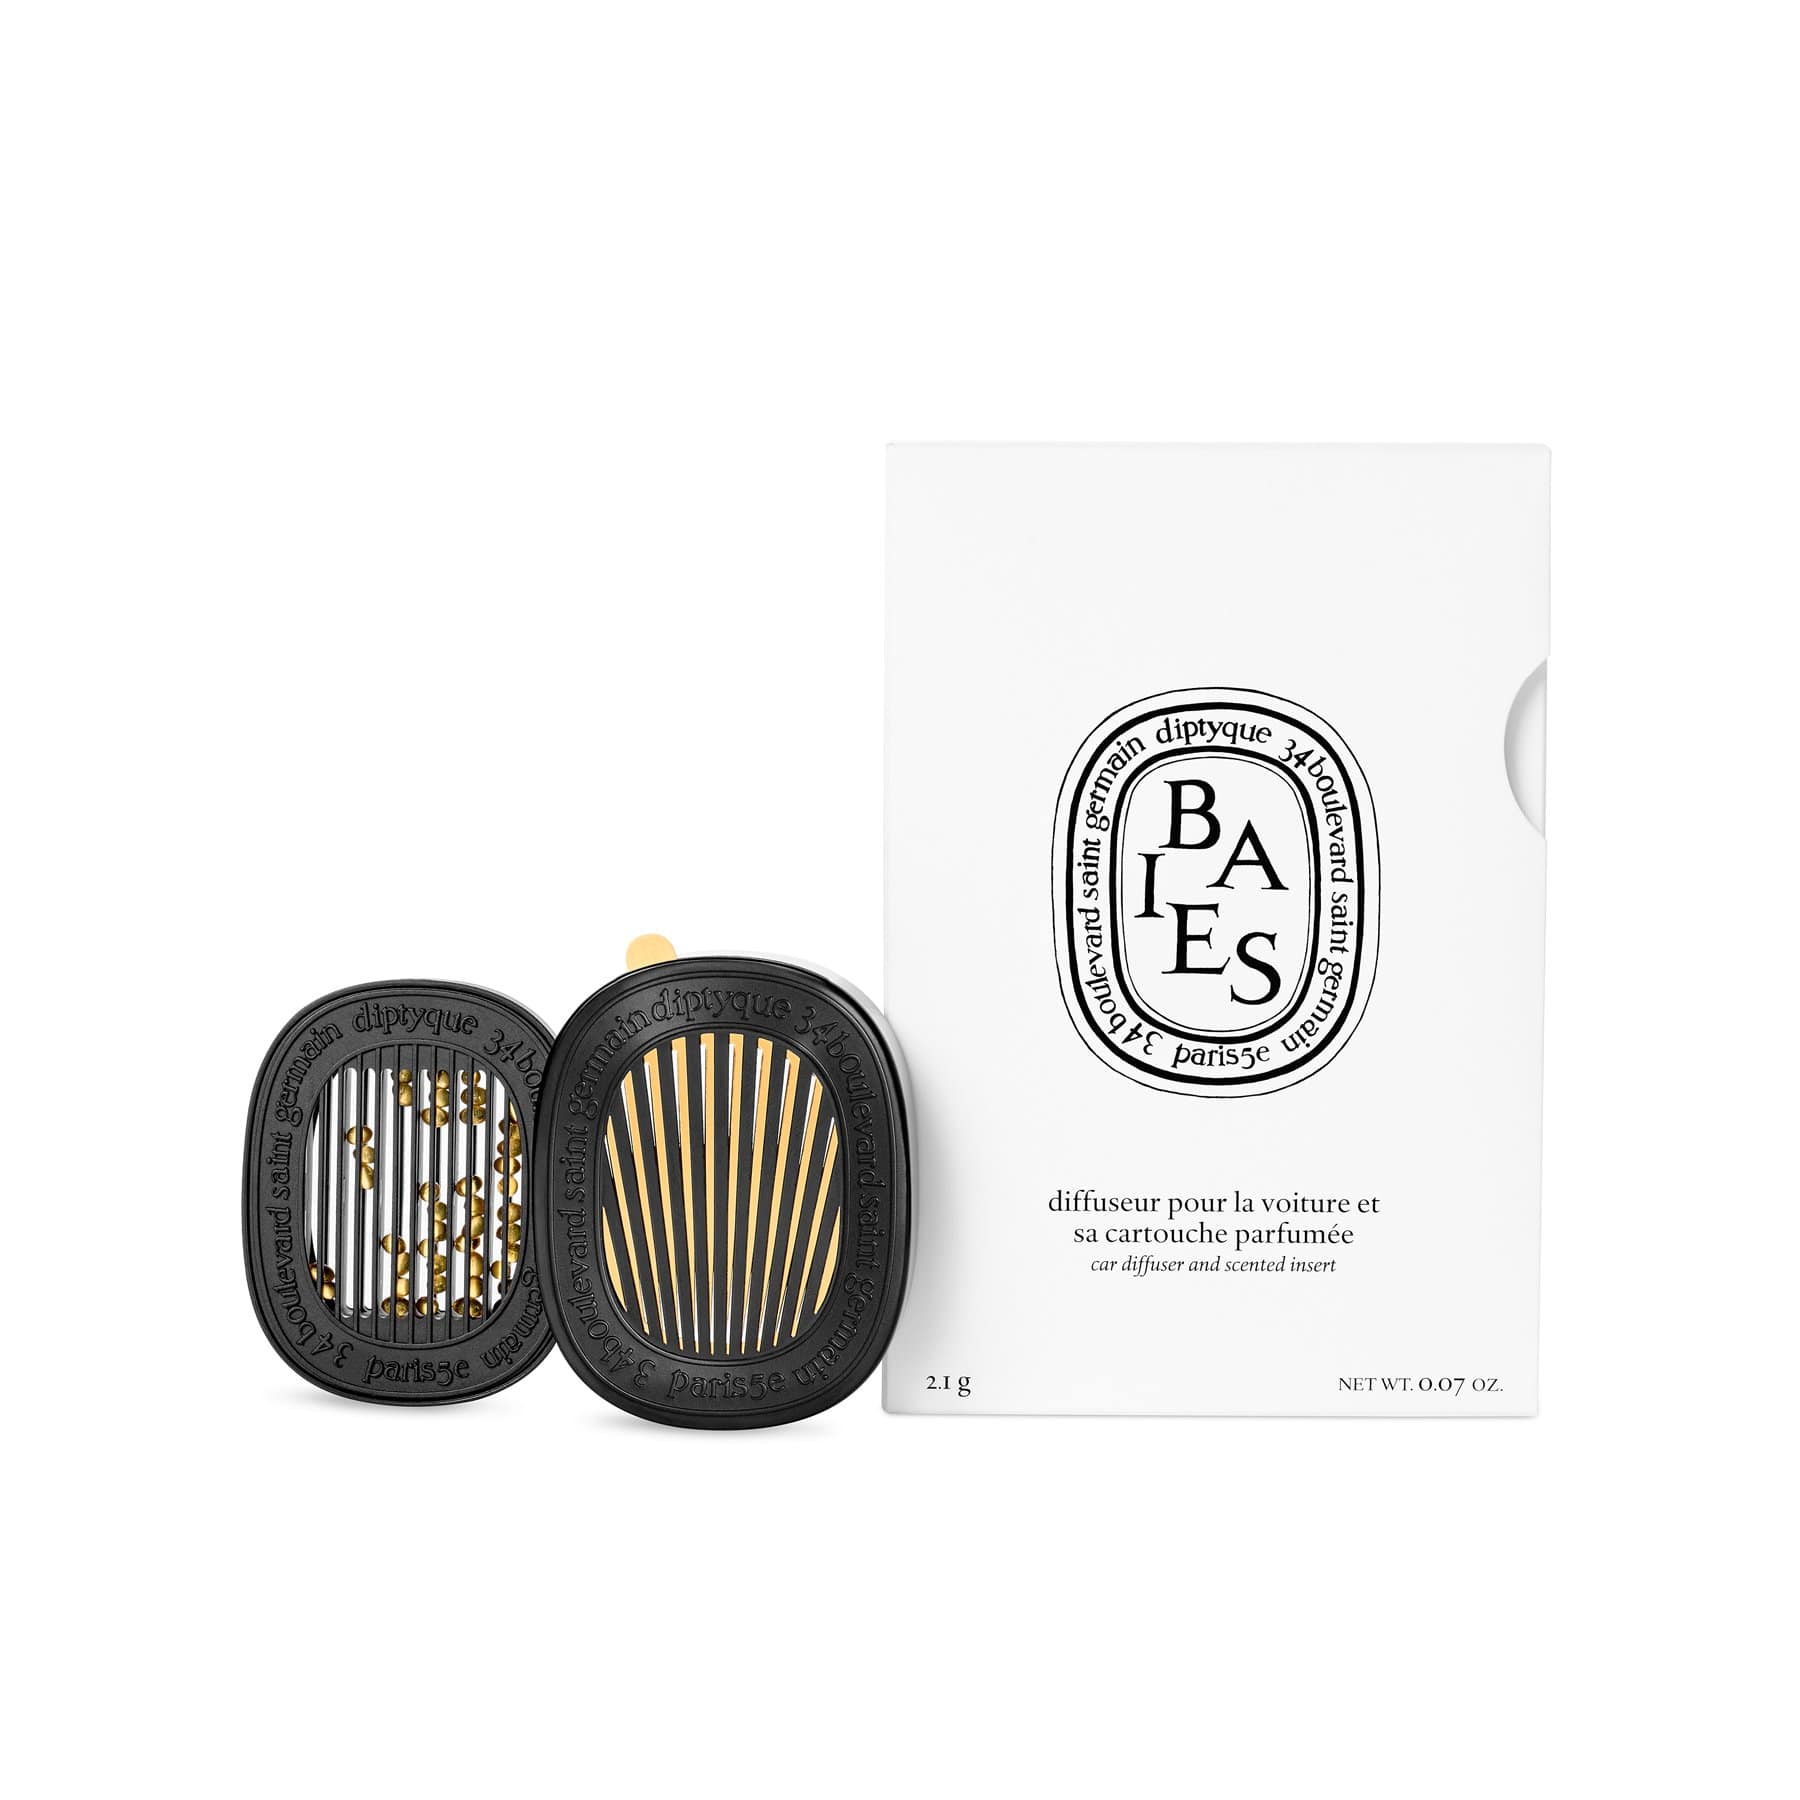 Diptyque car scent diffuser and 1 refill Car Diffuser by Baies